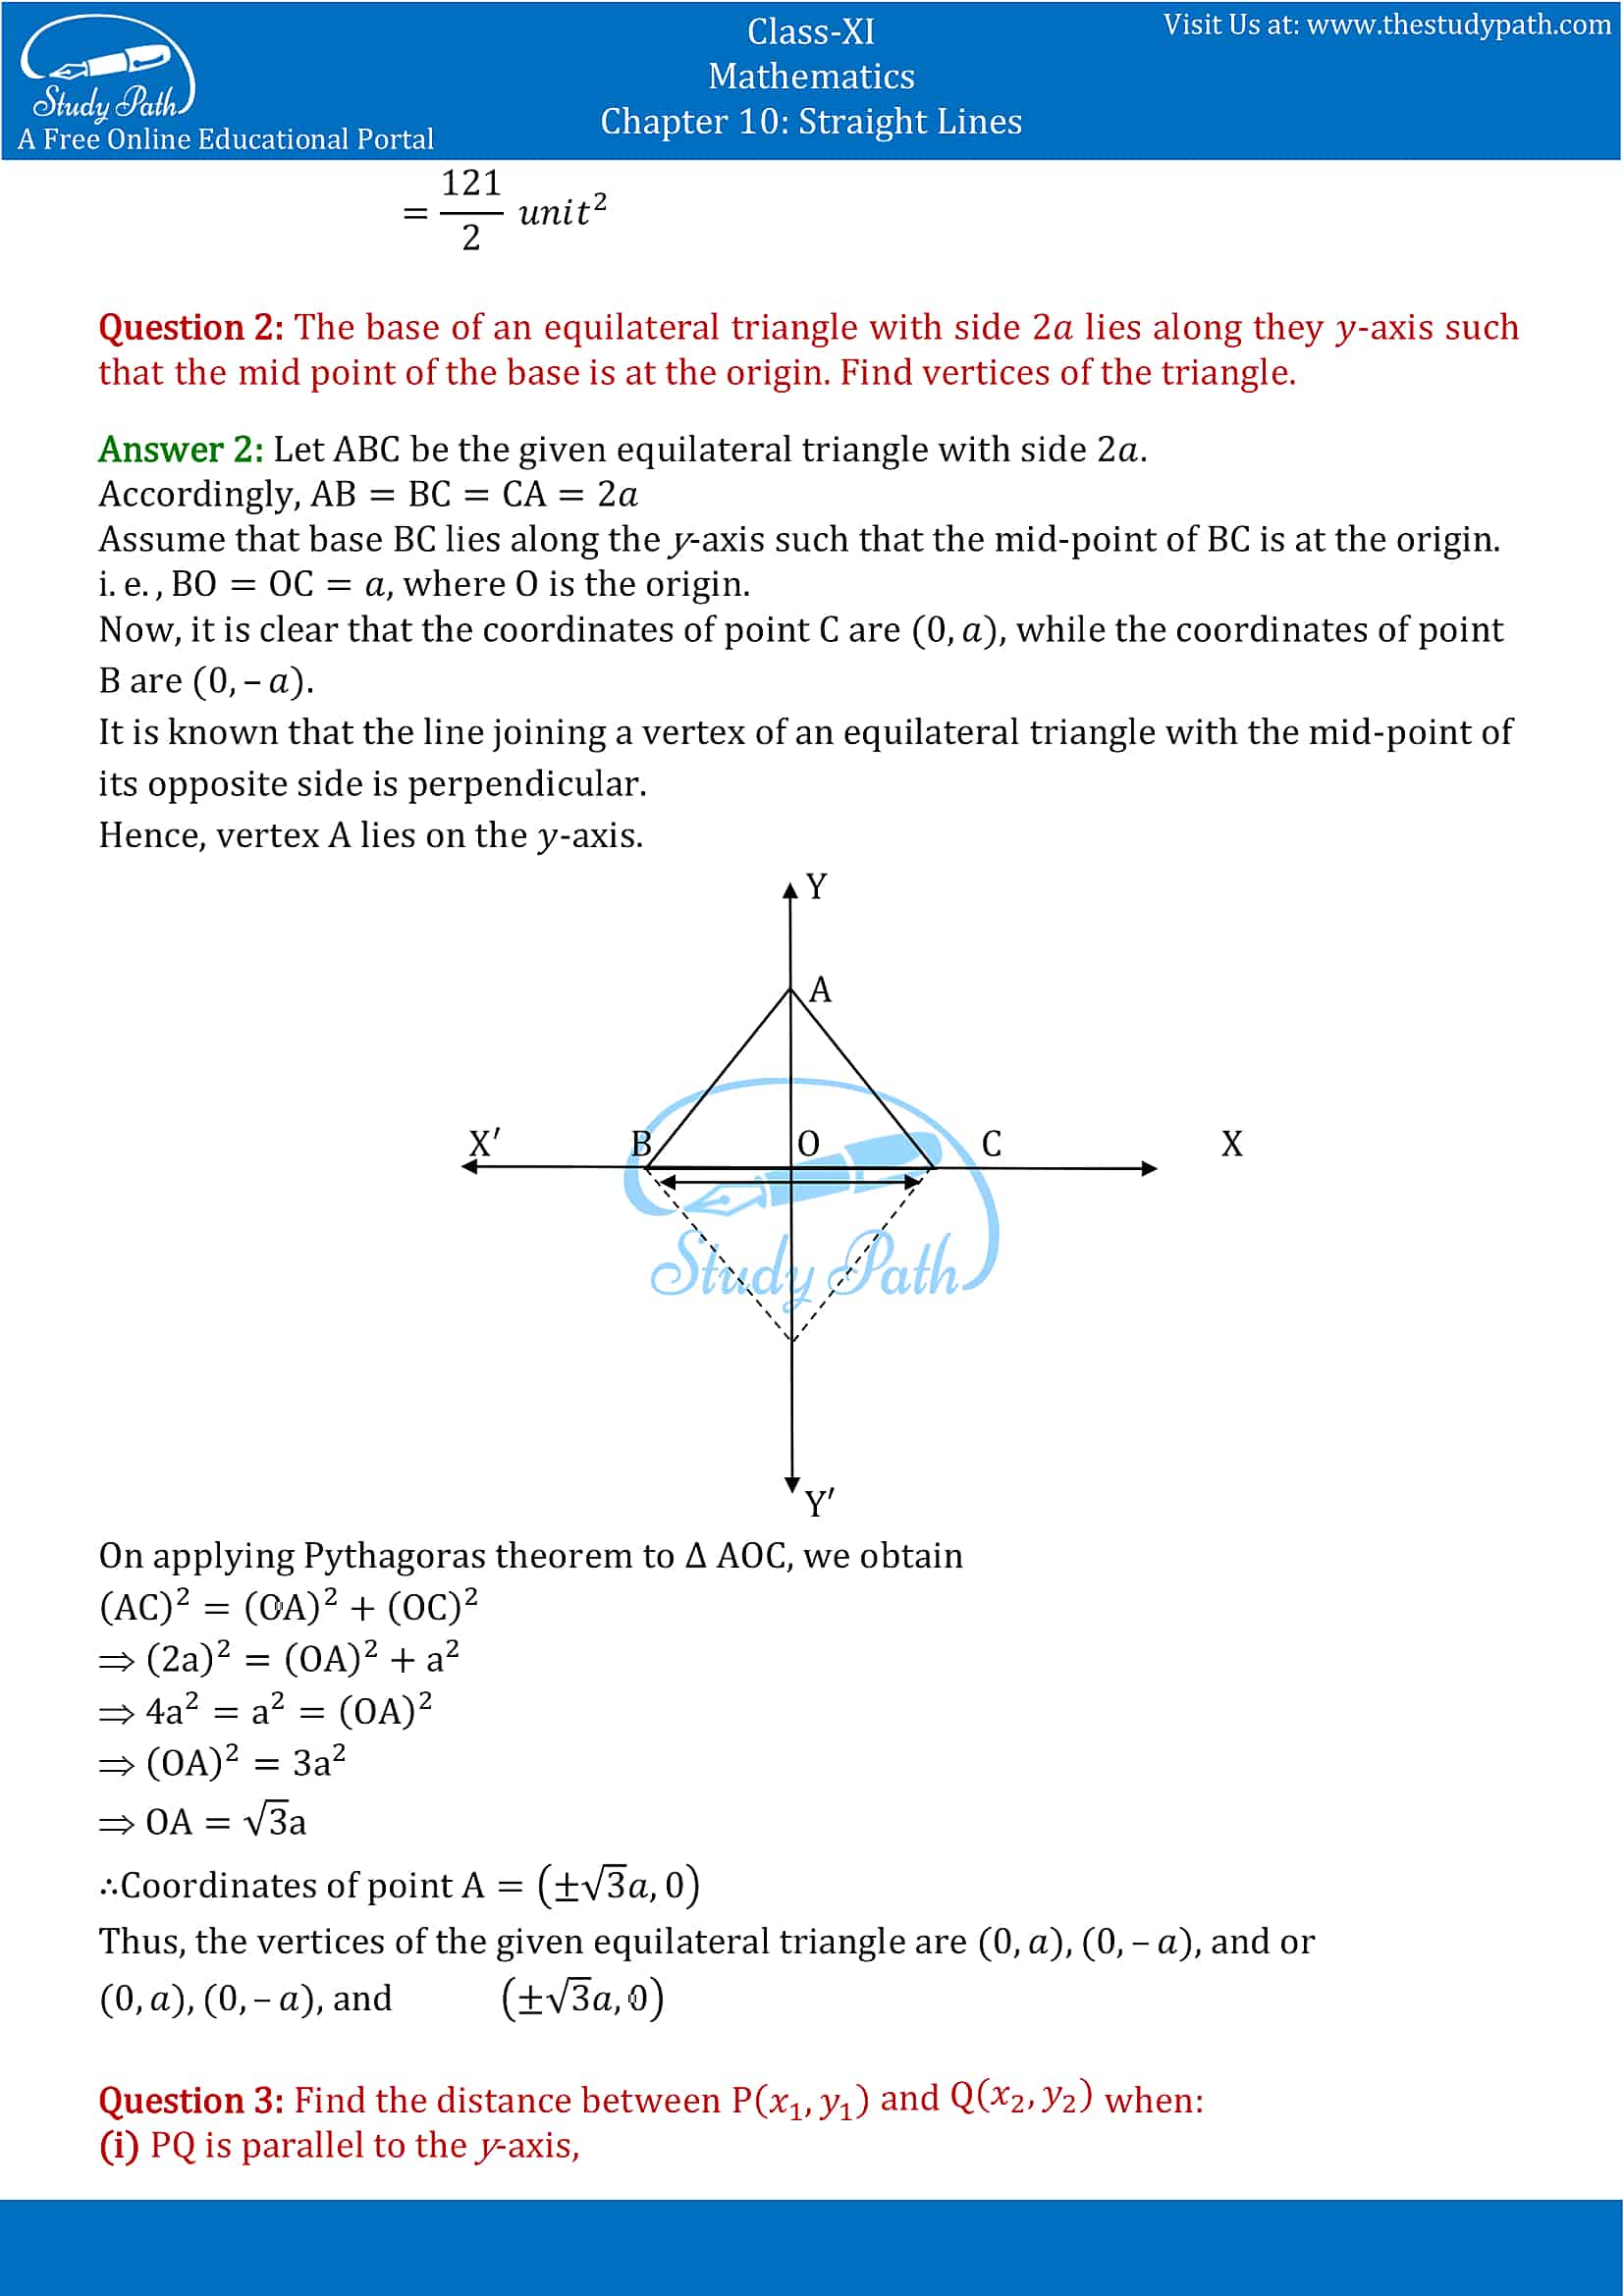 NCERT Solutions for Class 11 Maths chapter 10 Straight Lines Part-2